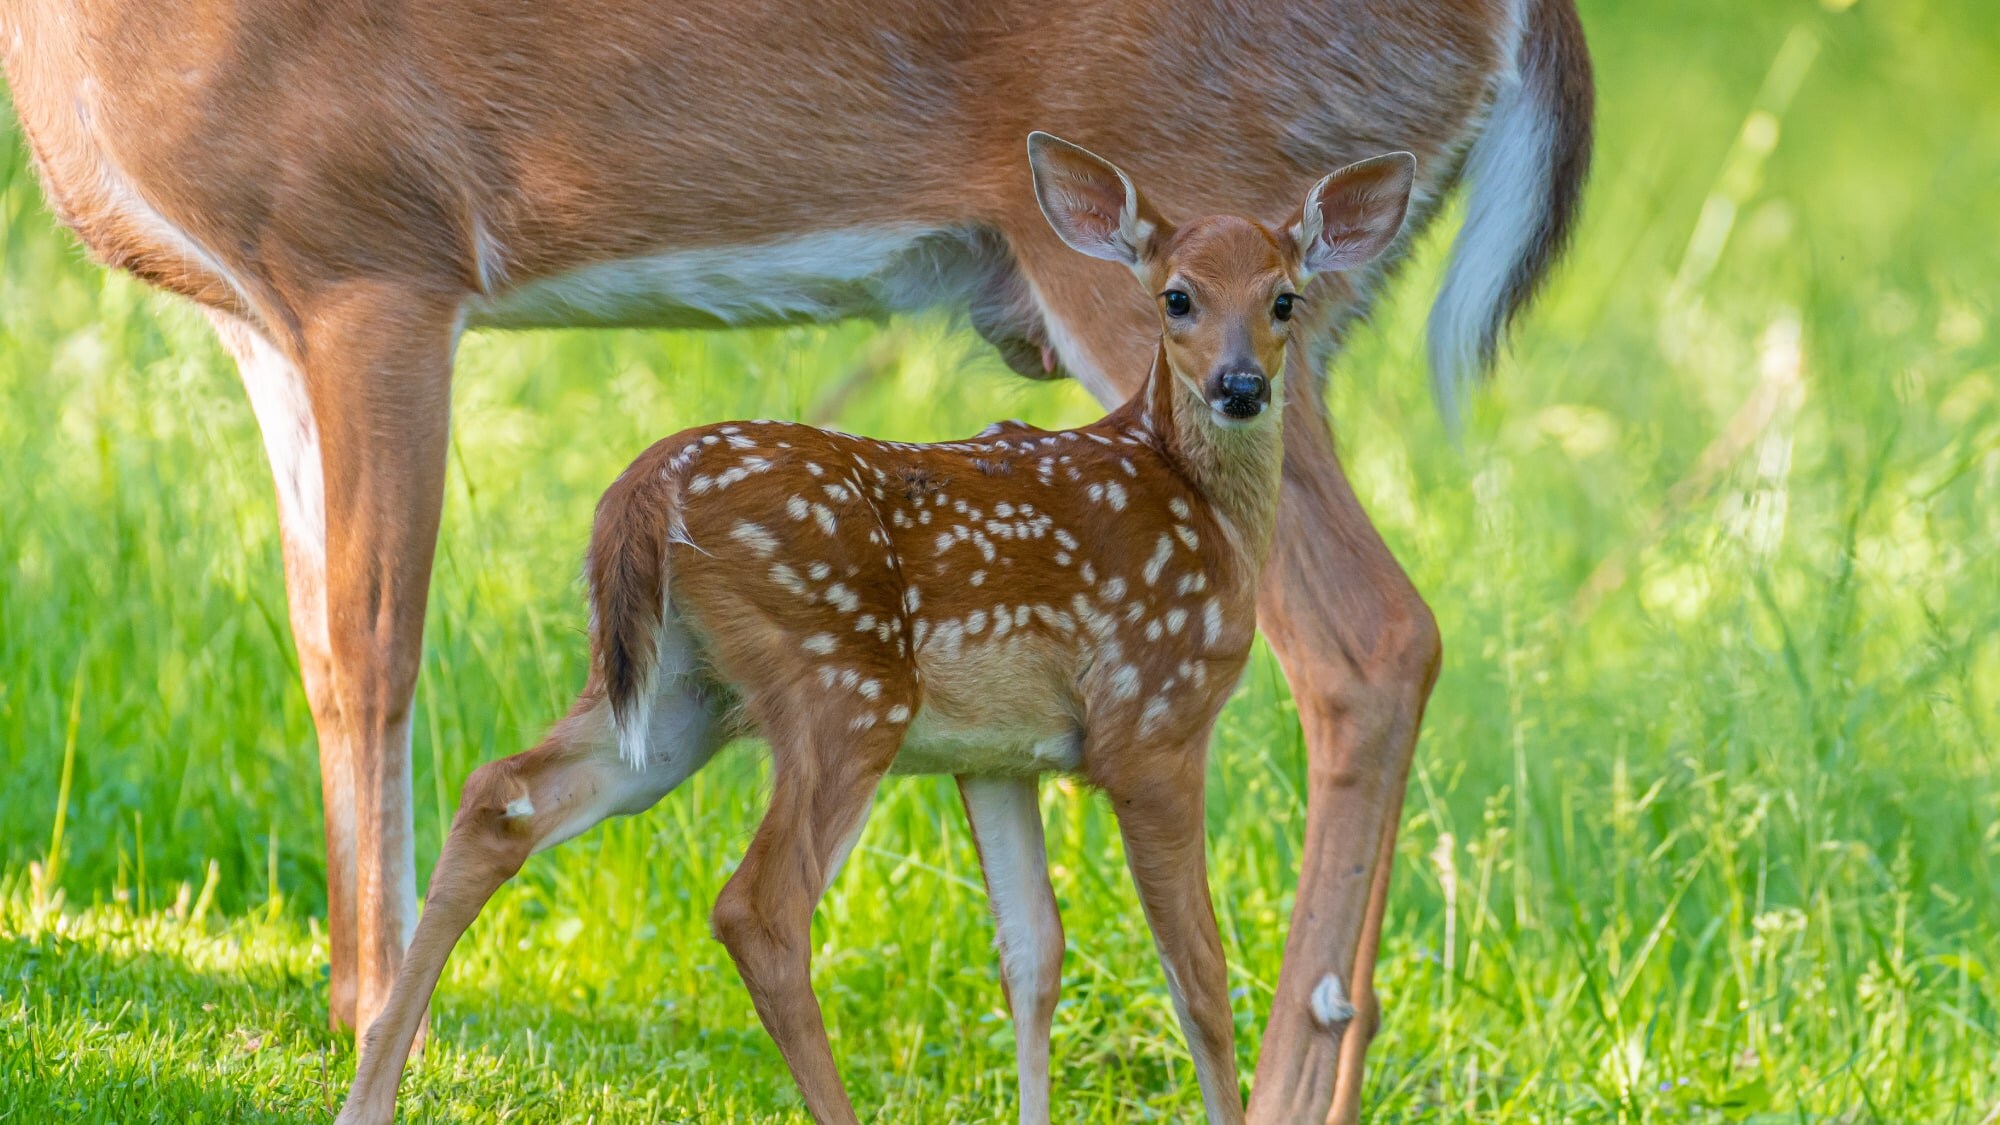 From mid-May to July every year, baby deer are born! Would you like to come and see the cute fawns?